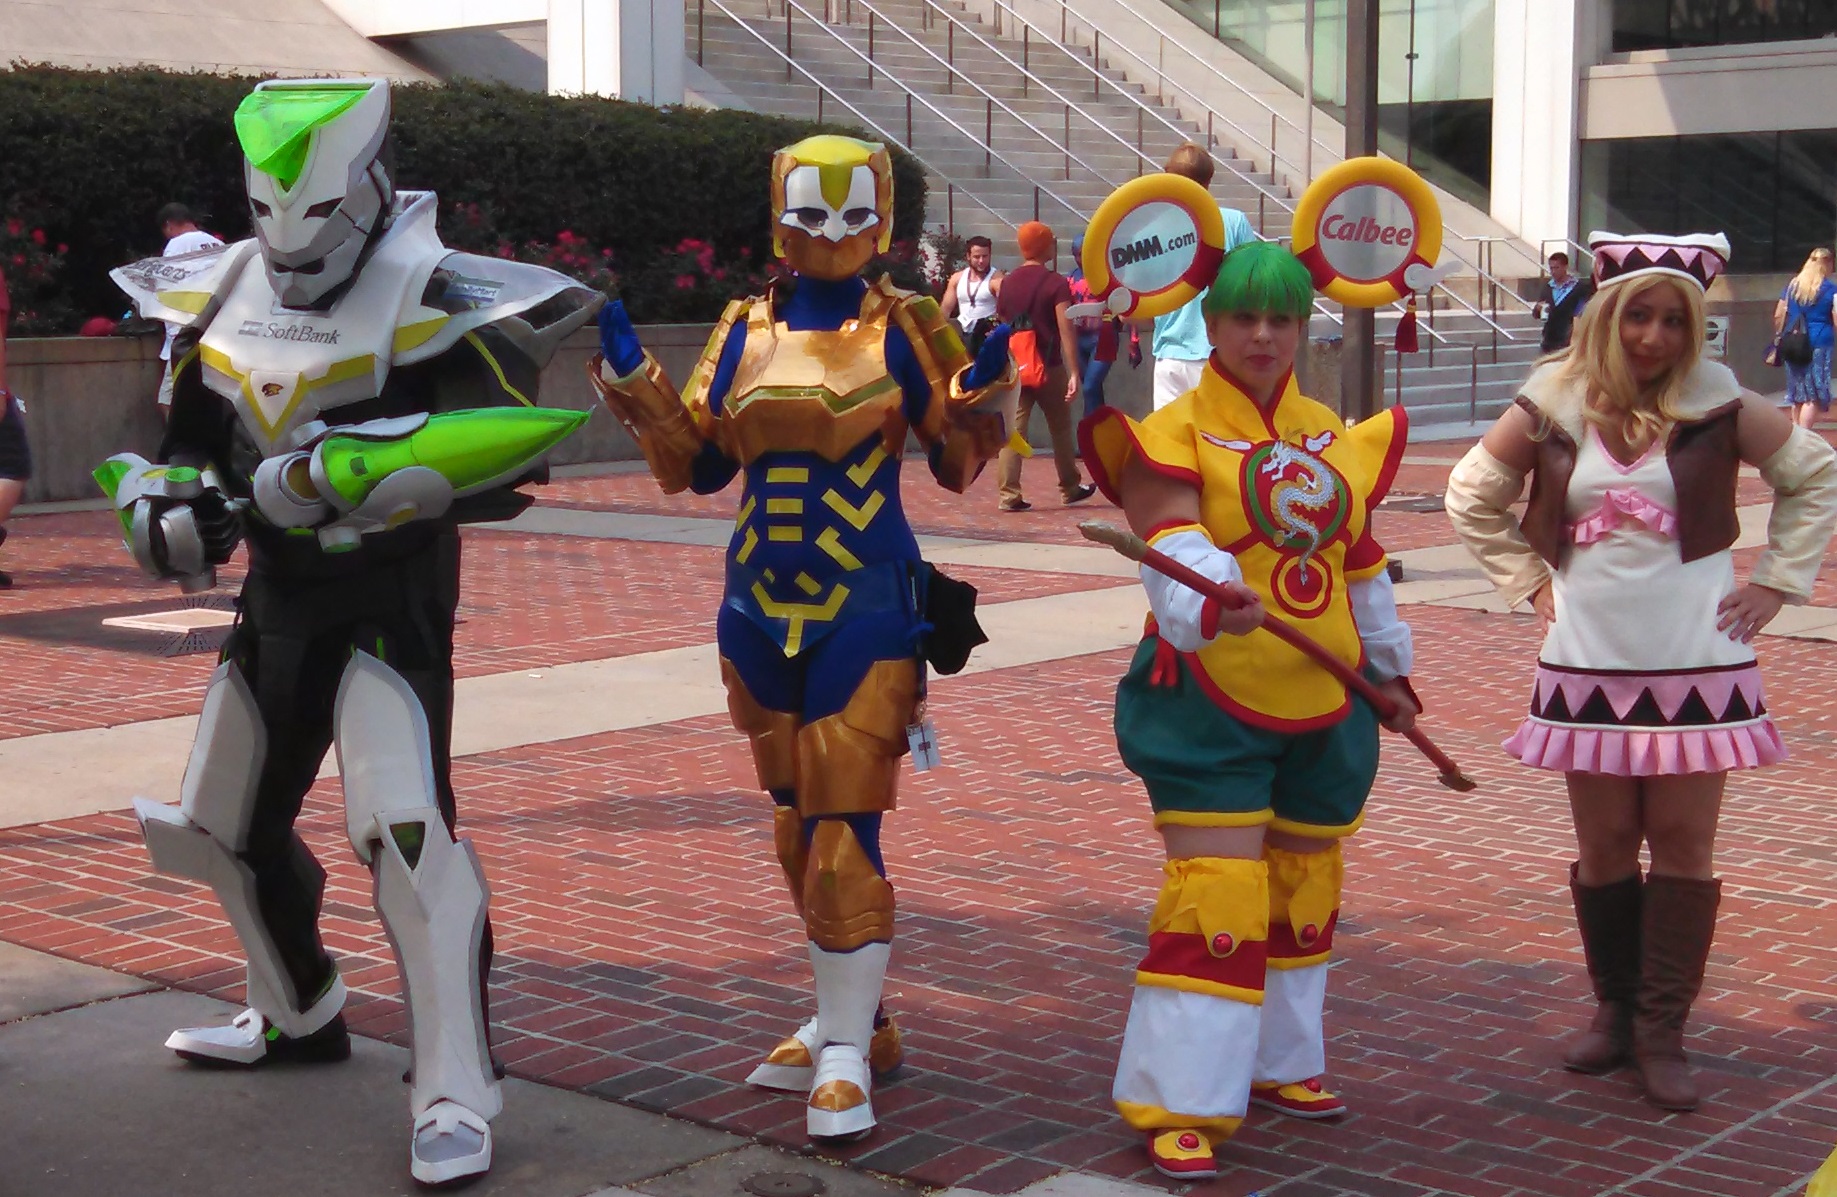 Baltimore’s animore anime con goes down this weekend